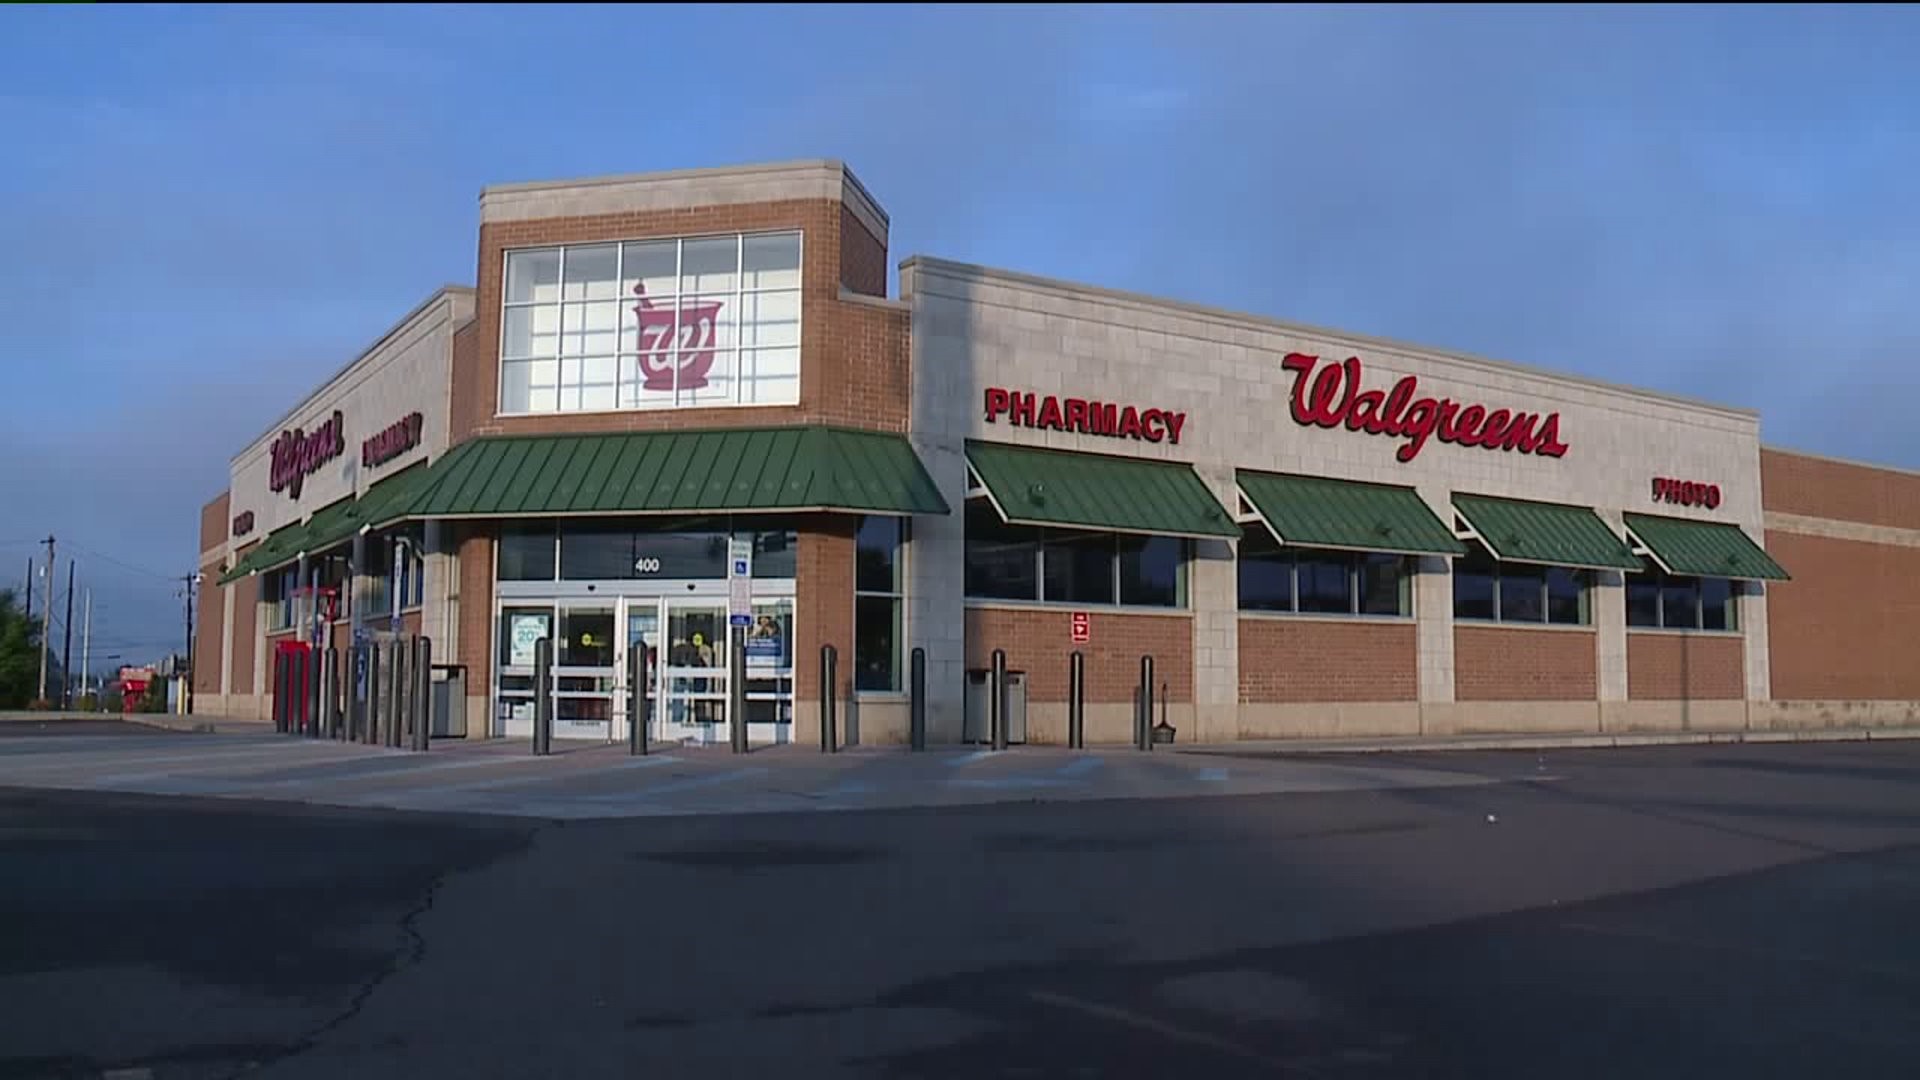 'Don't close this one!' - Local Shoppers Hope Their Walgreens Store Remains Open